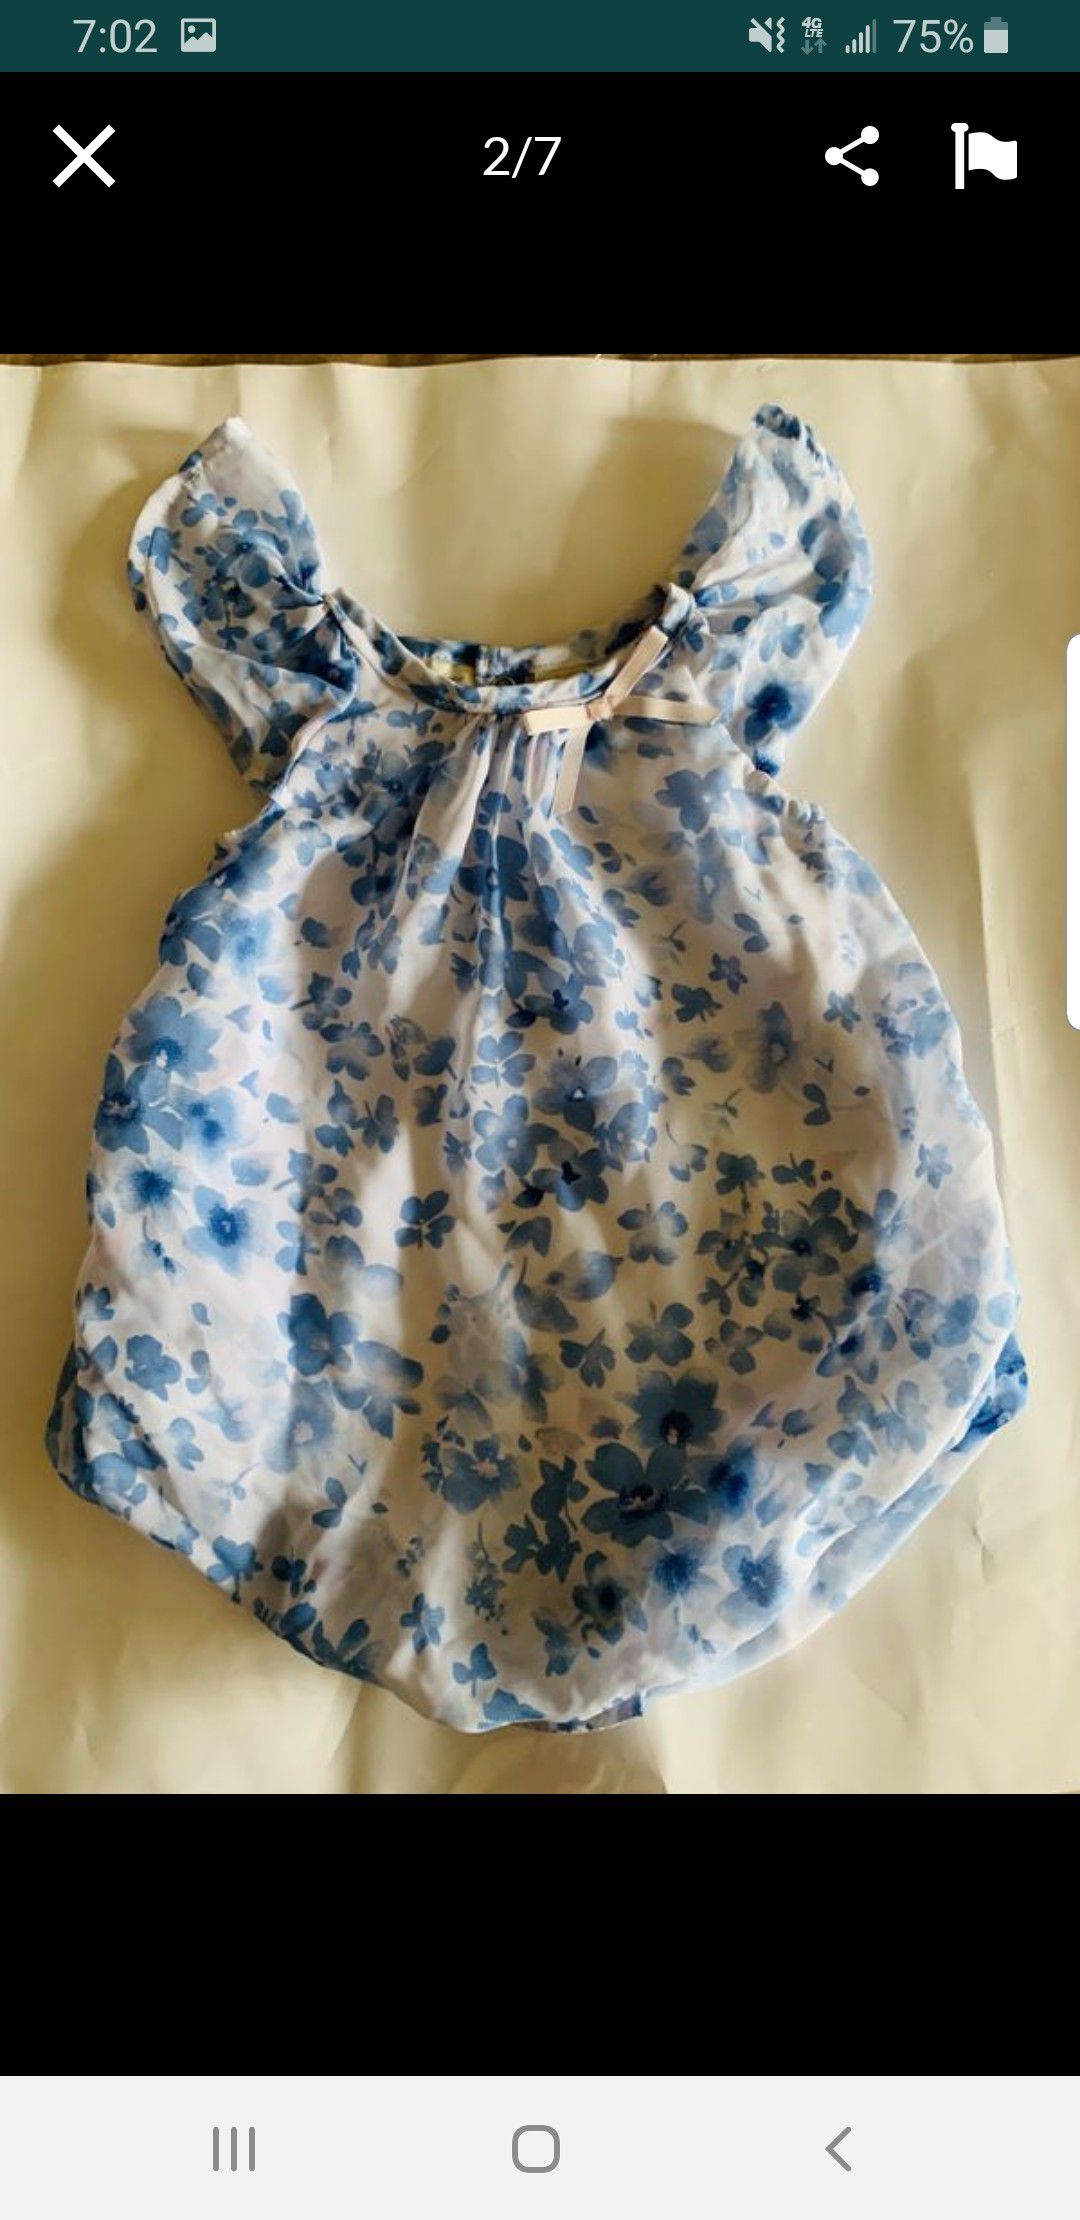 Baby girl dress fits size 0-3 months